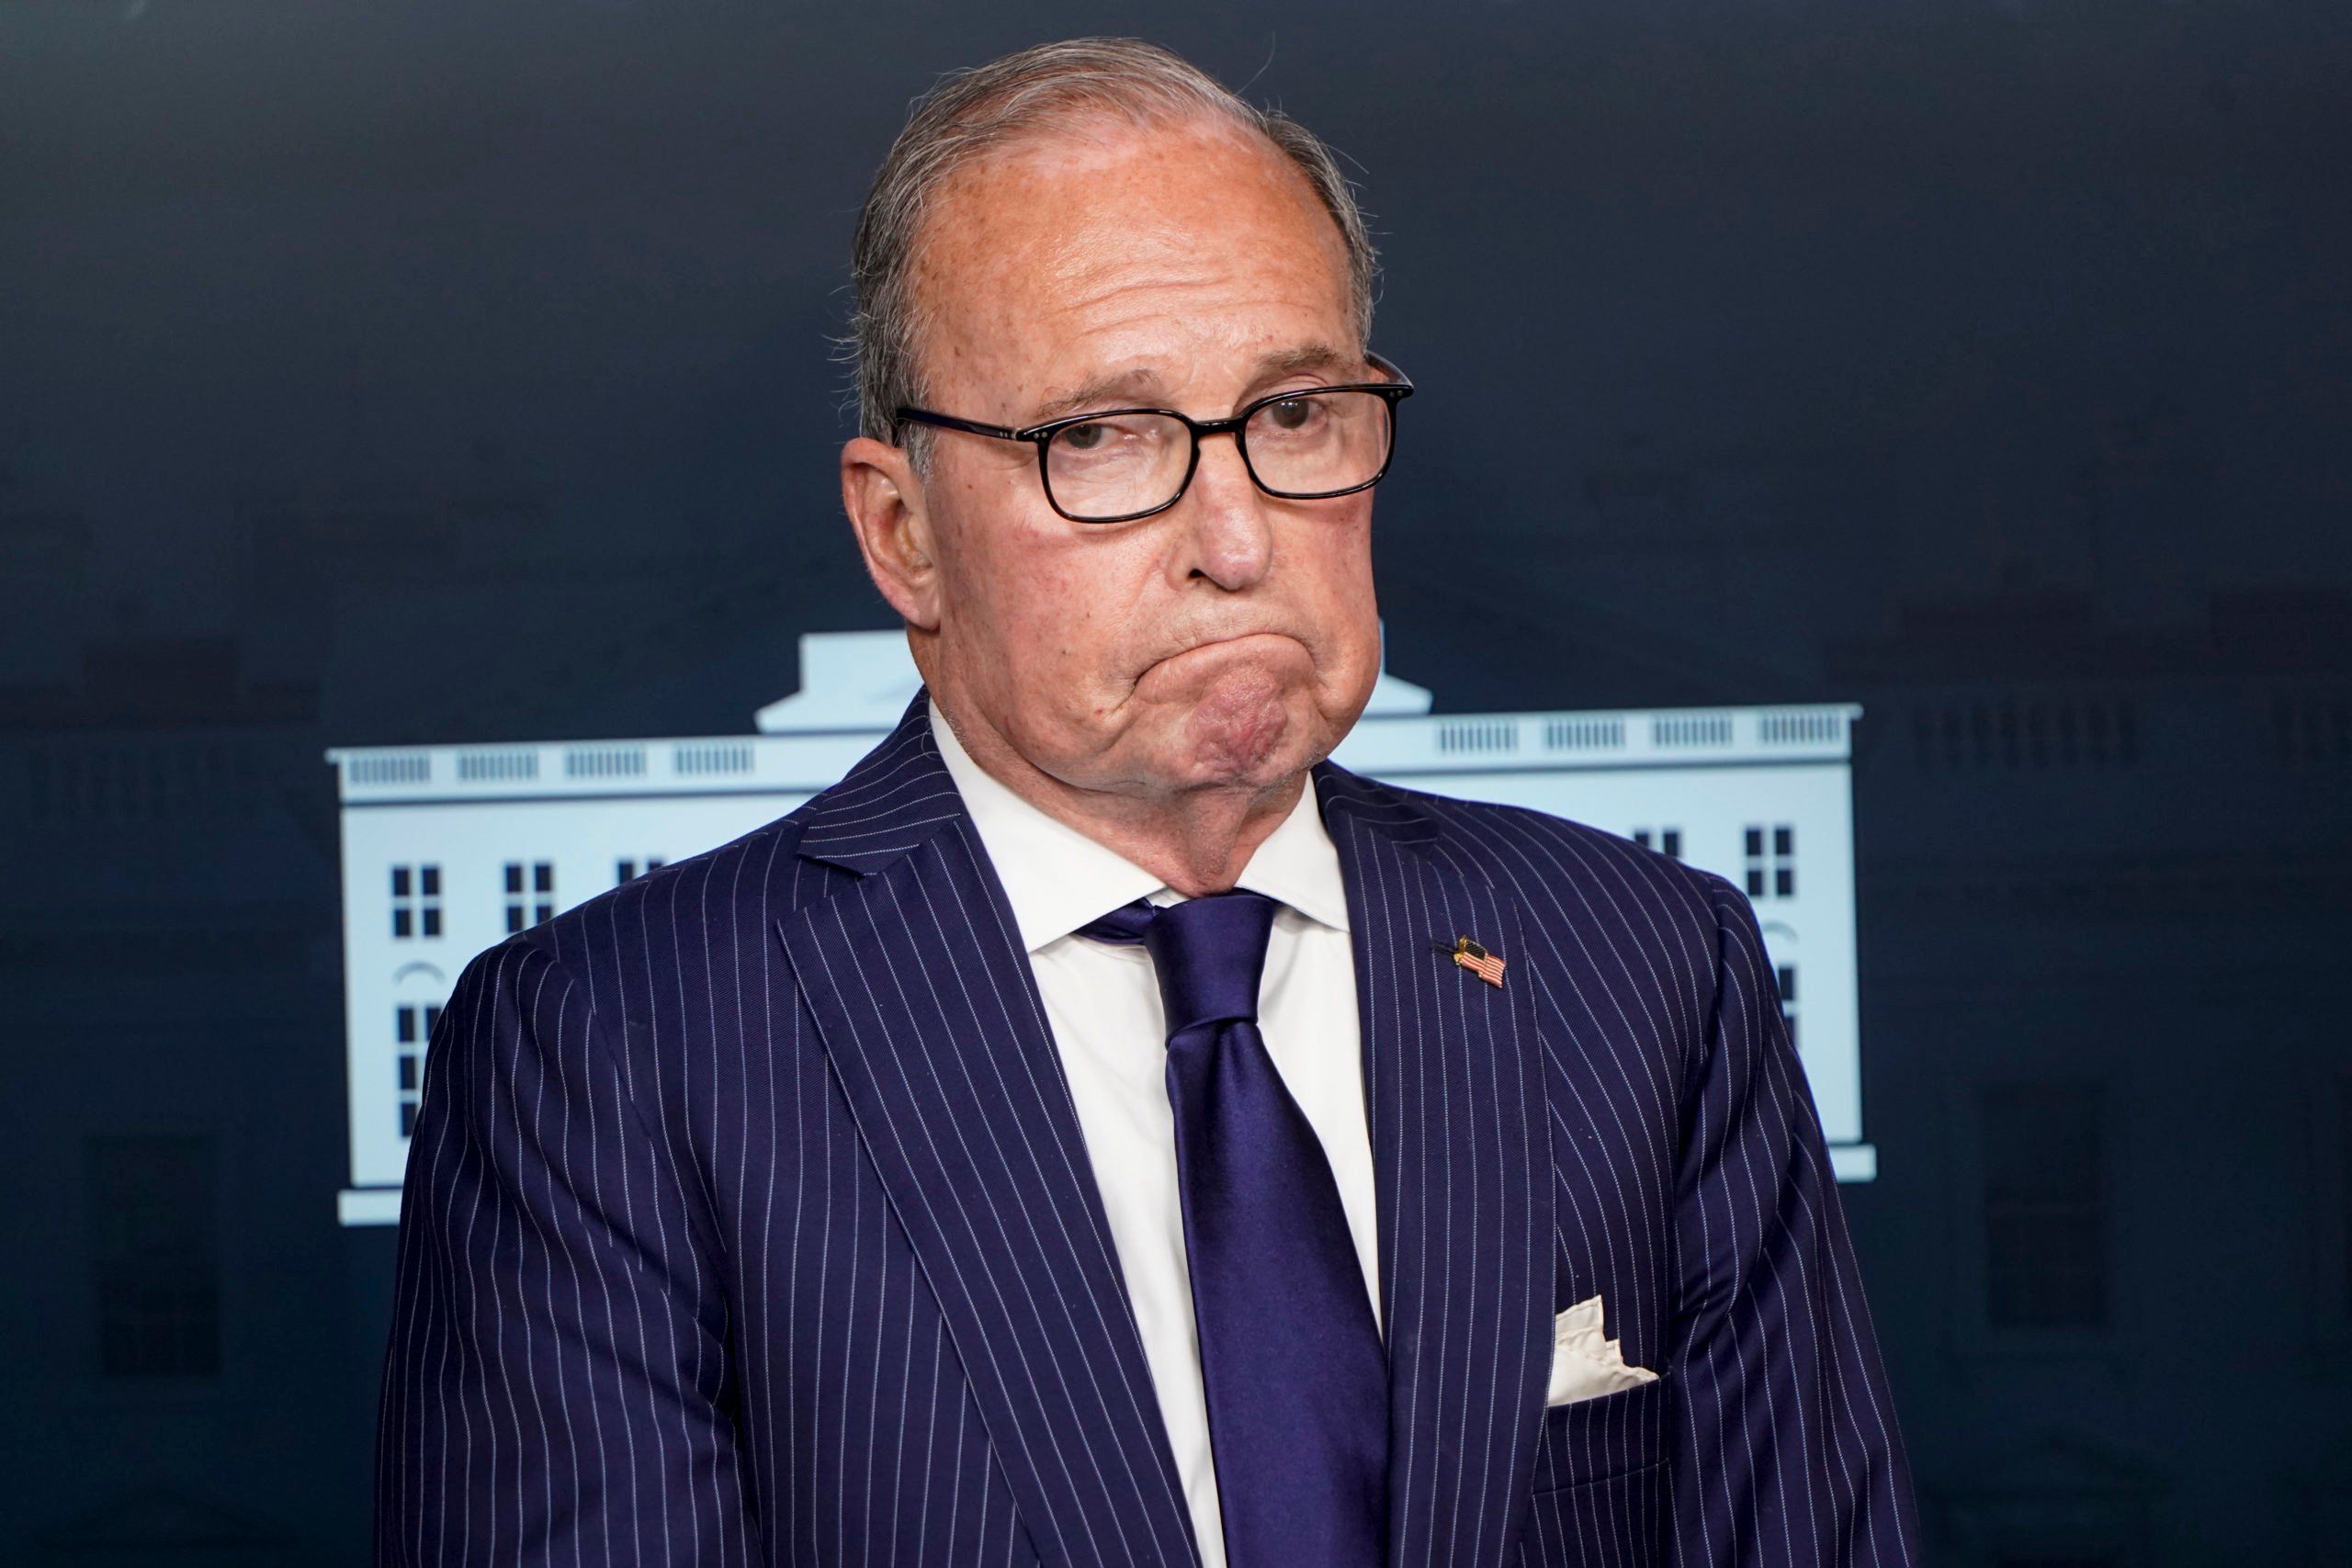 Director of the National Economic Council Larry Kudlow attends a news conference in the briefing room of the White House on September 23, 2020 in Washington, DC. (Joshua Roberts/Getty Images)